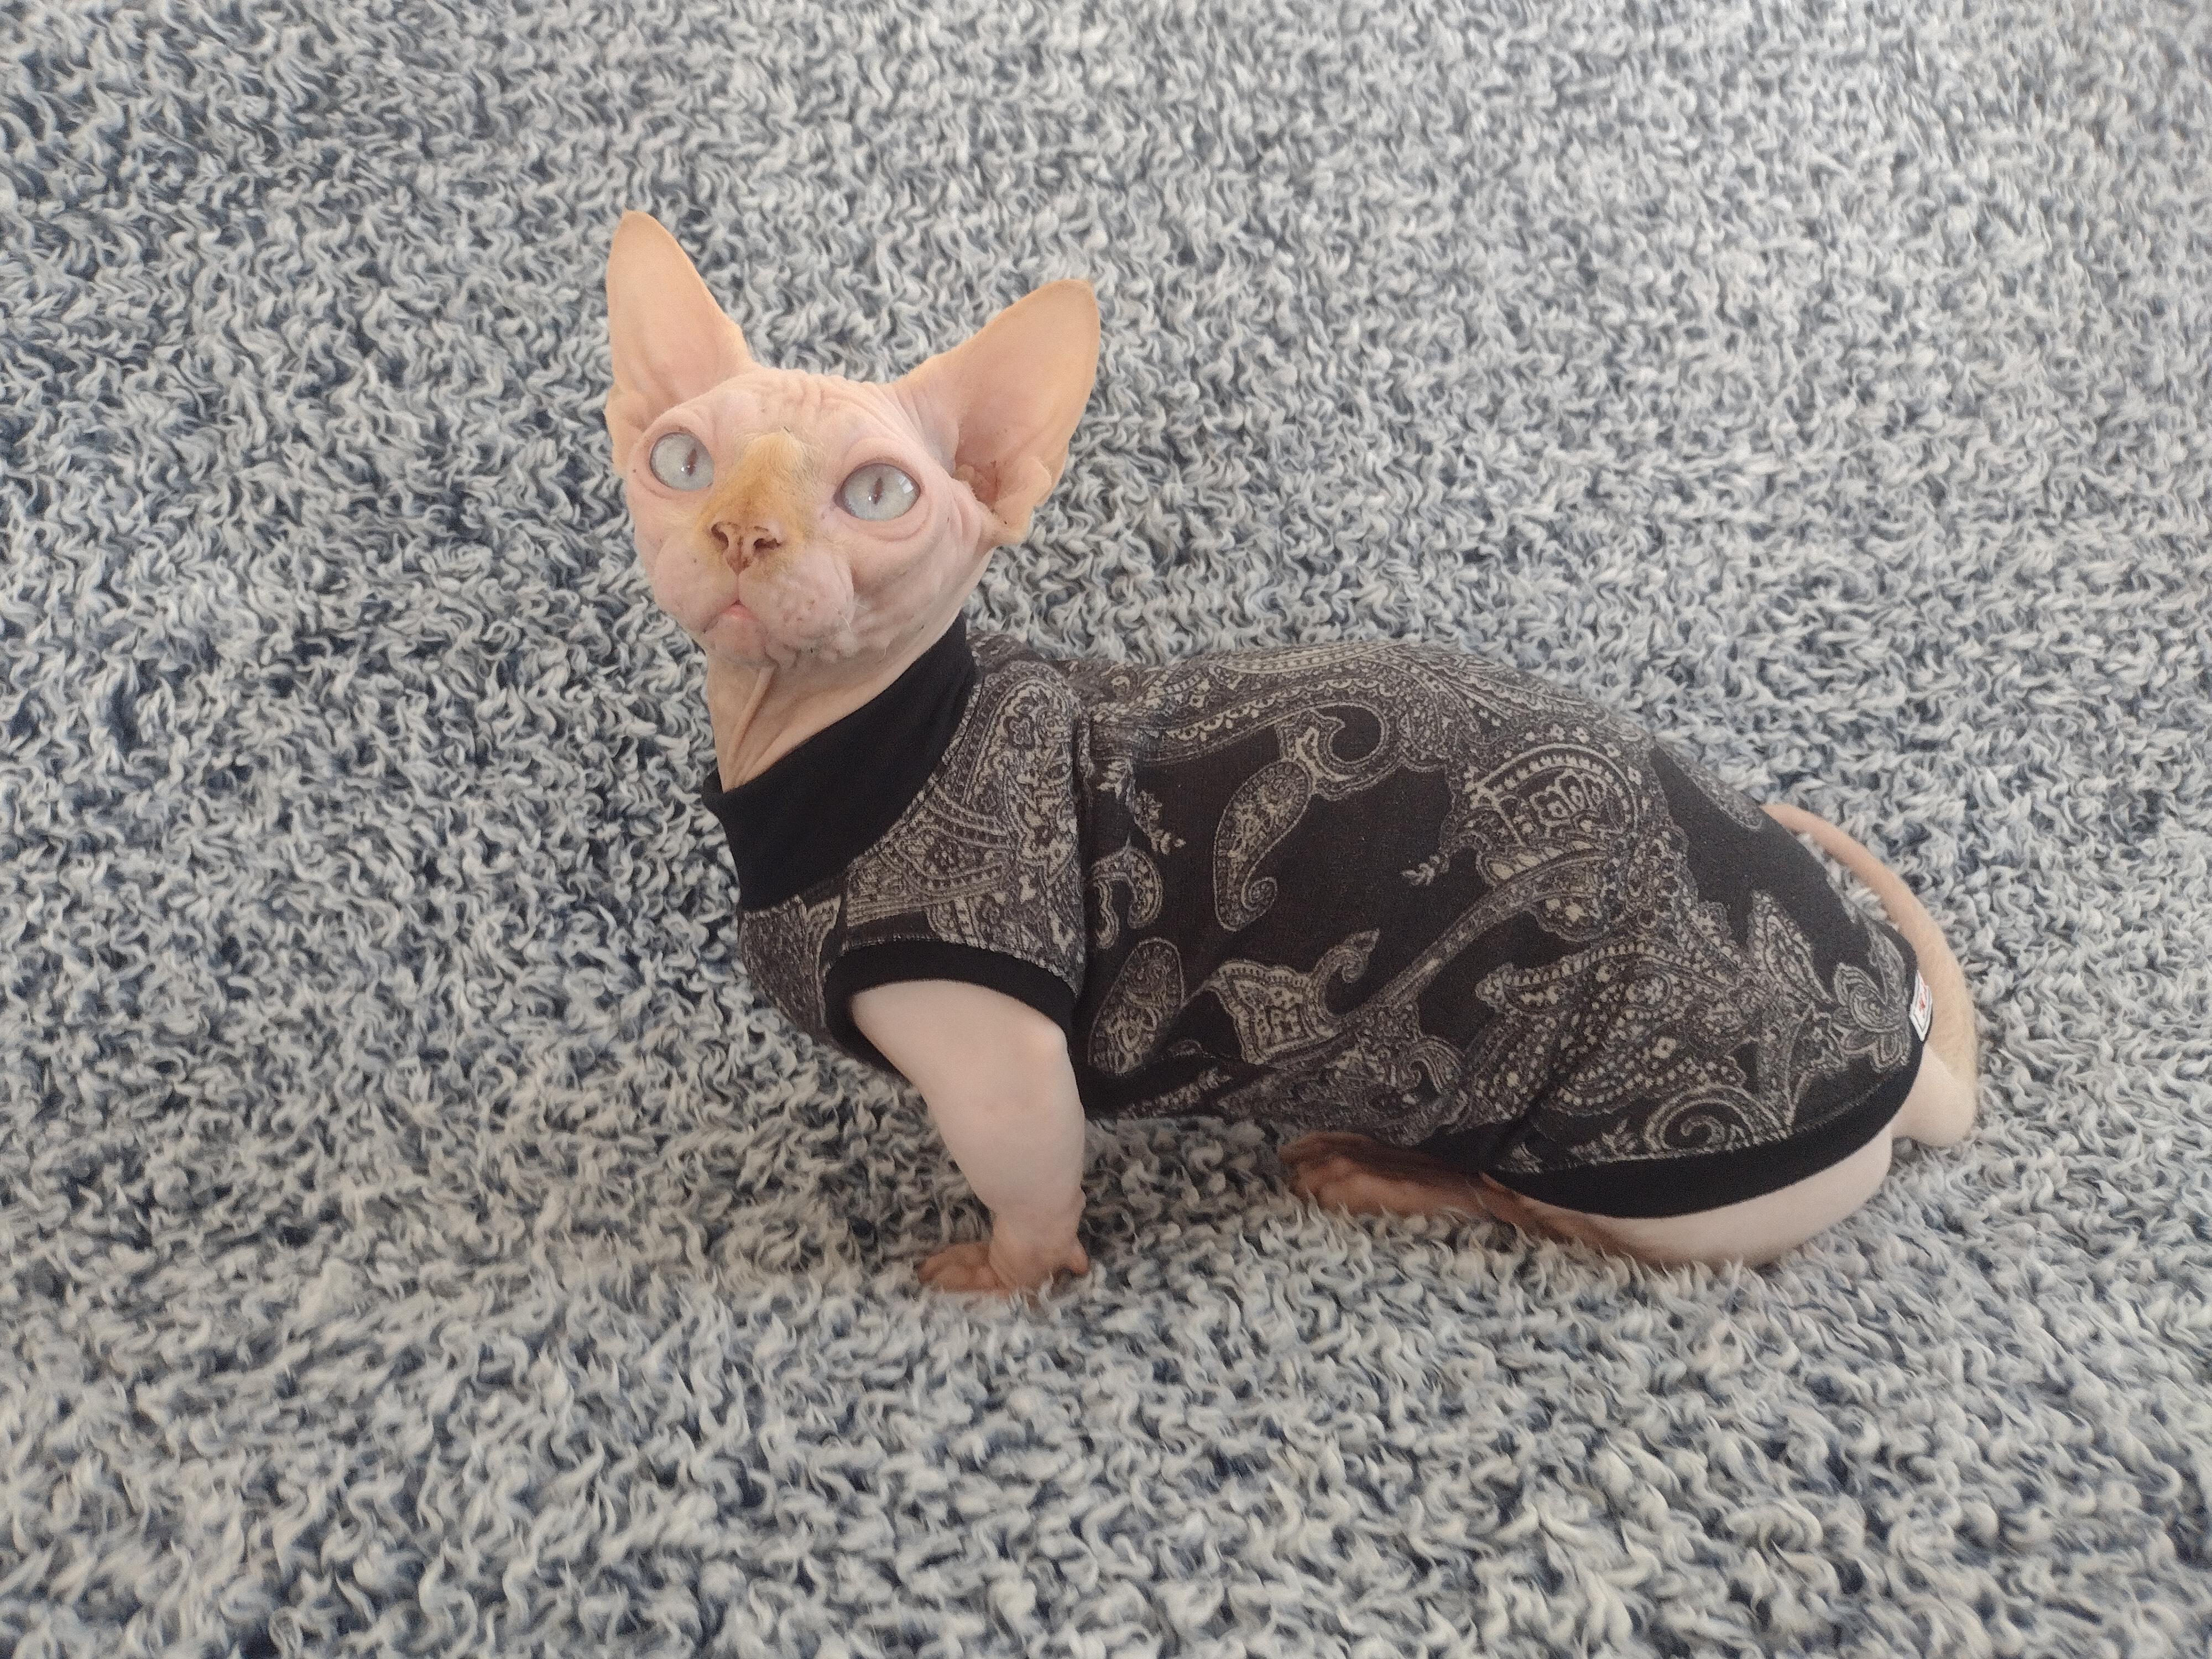 Cat Sweater Sphynx Sweater Cat Clothes Sphynx Clothes 